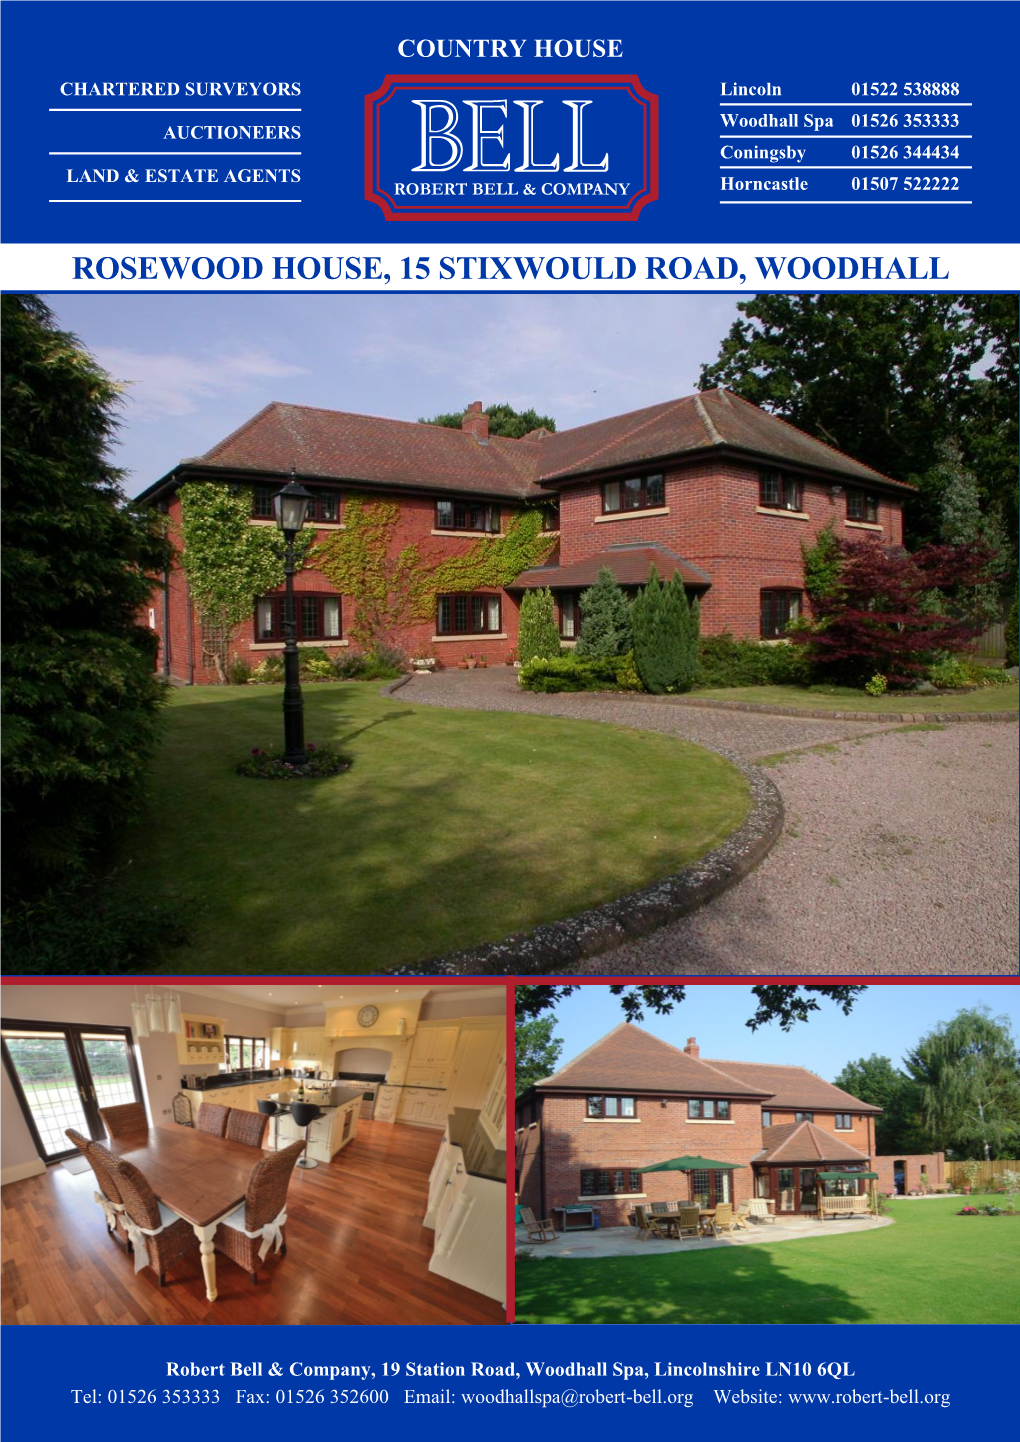 Rosewood House, 15 Stixwould Road, Woodhall Spa